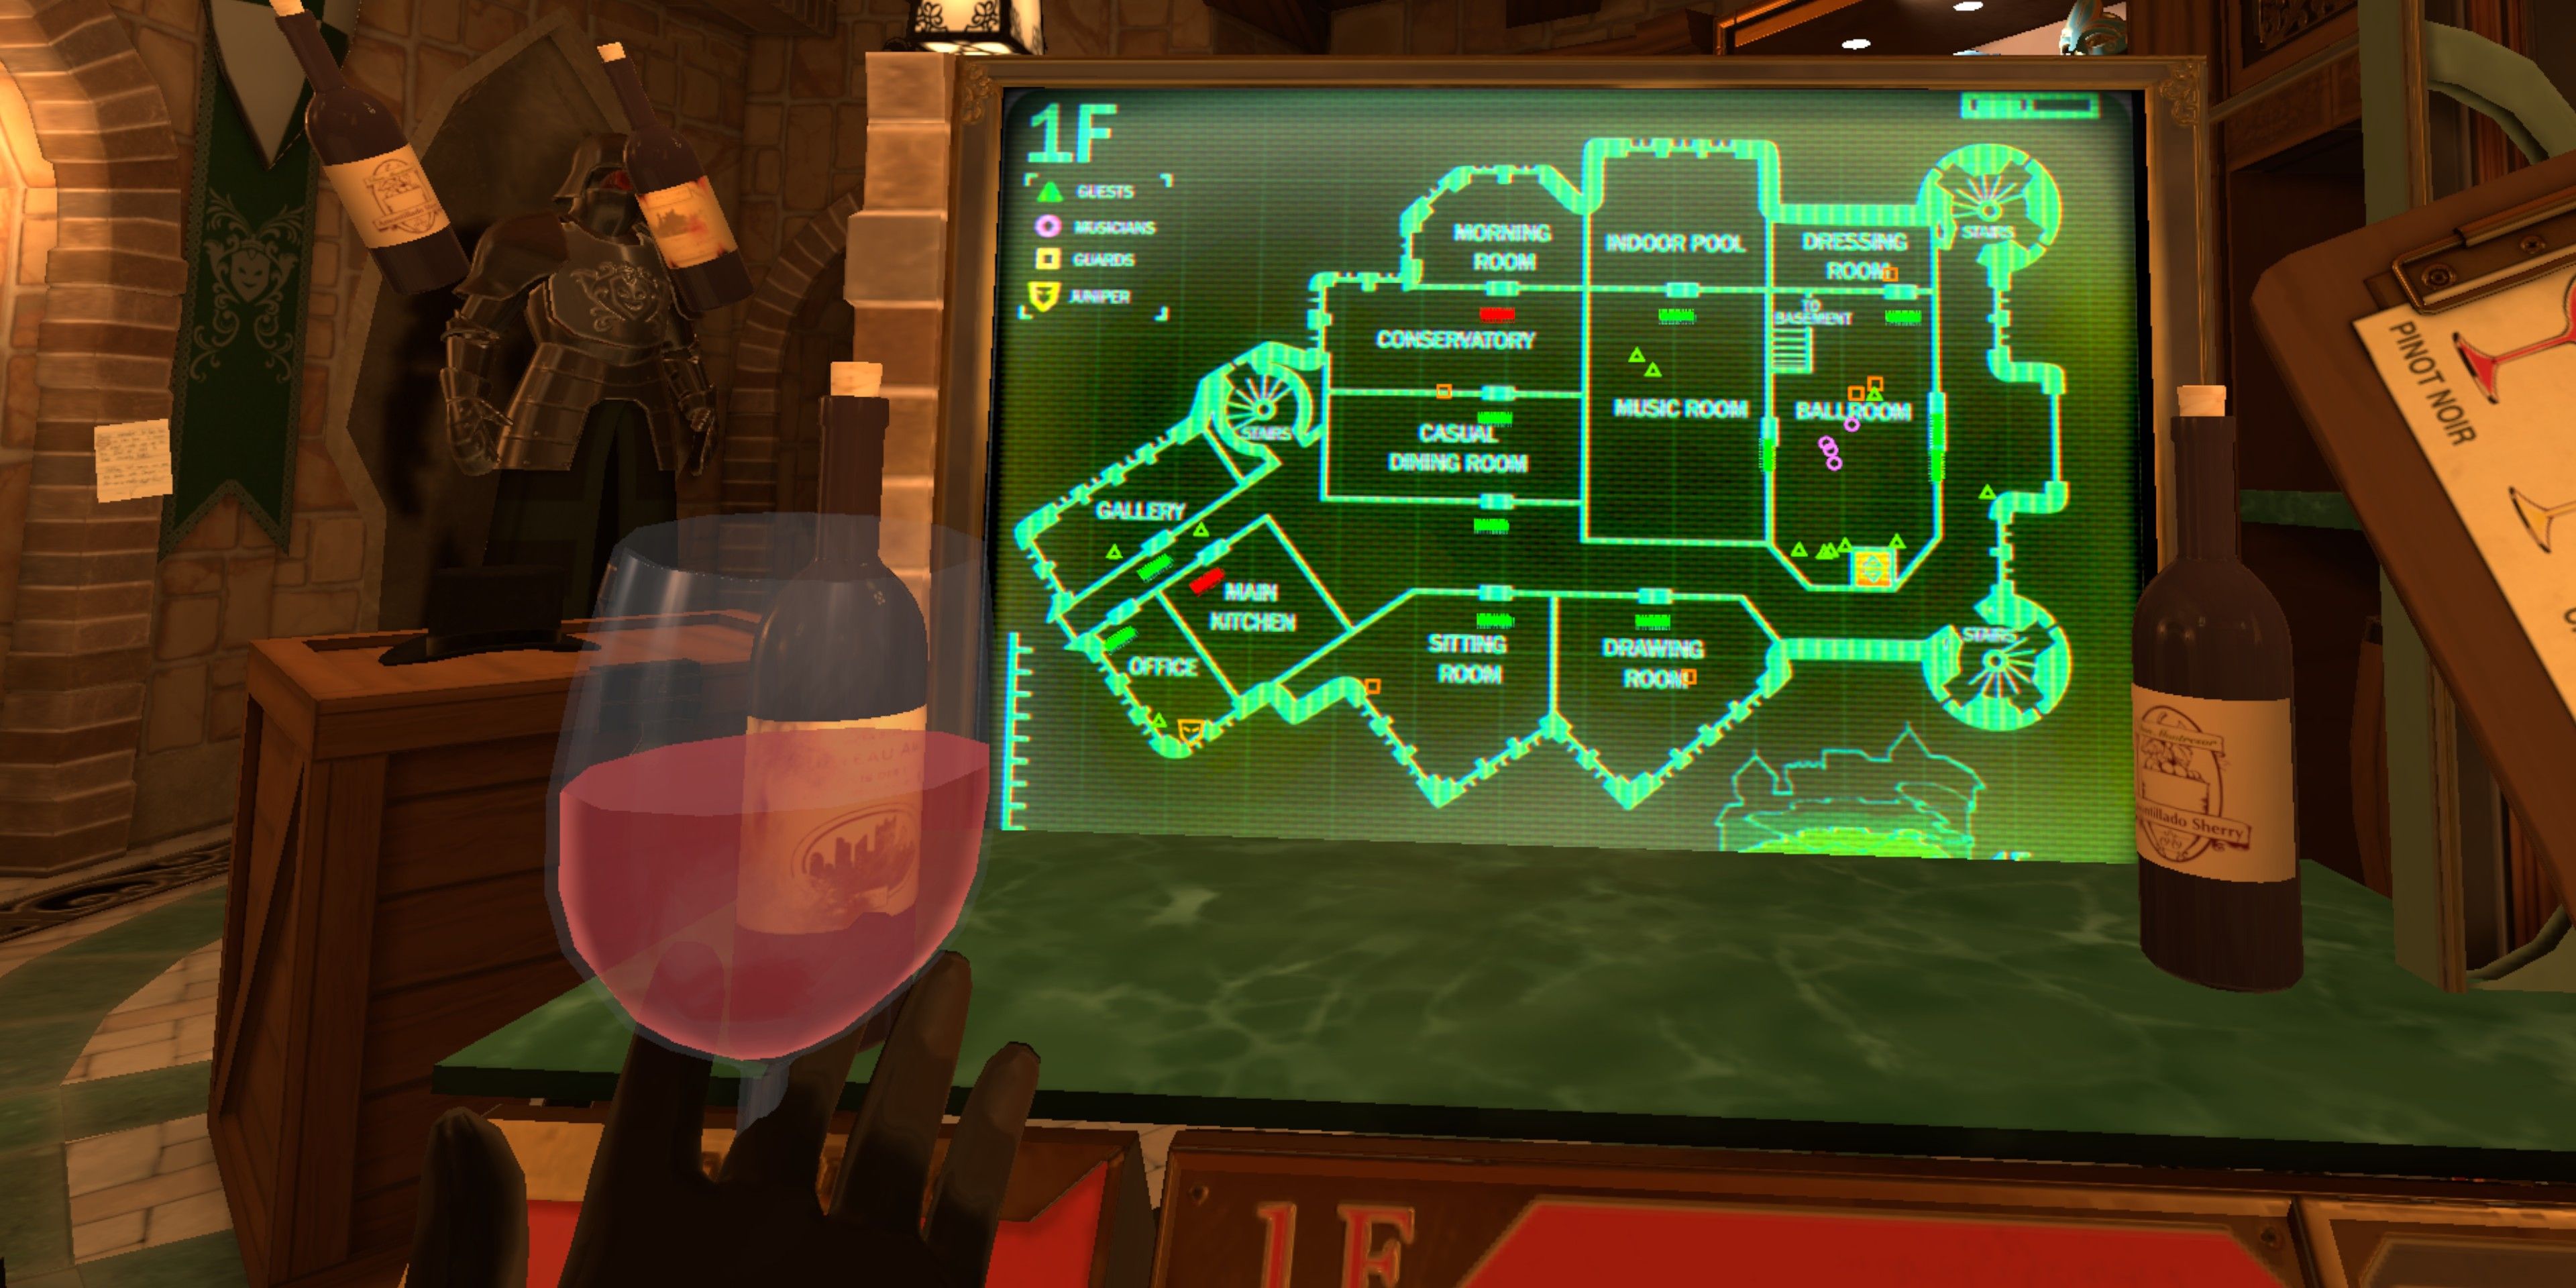 In-game view of I Expect You To Die 2 showing a full glass of wine ad a green digital map of a building on a computer screen.